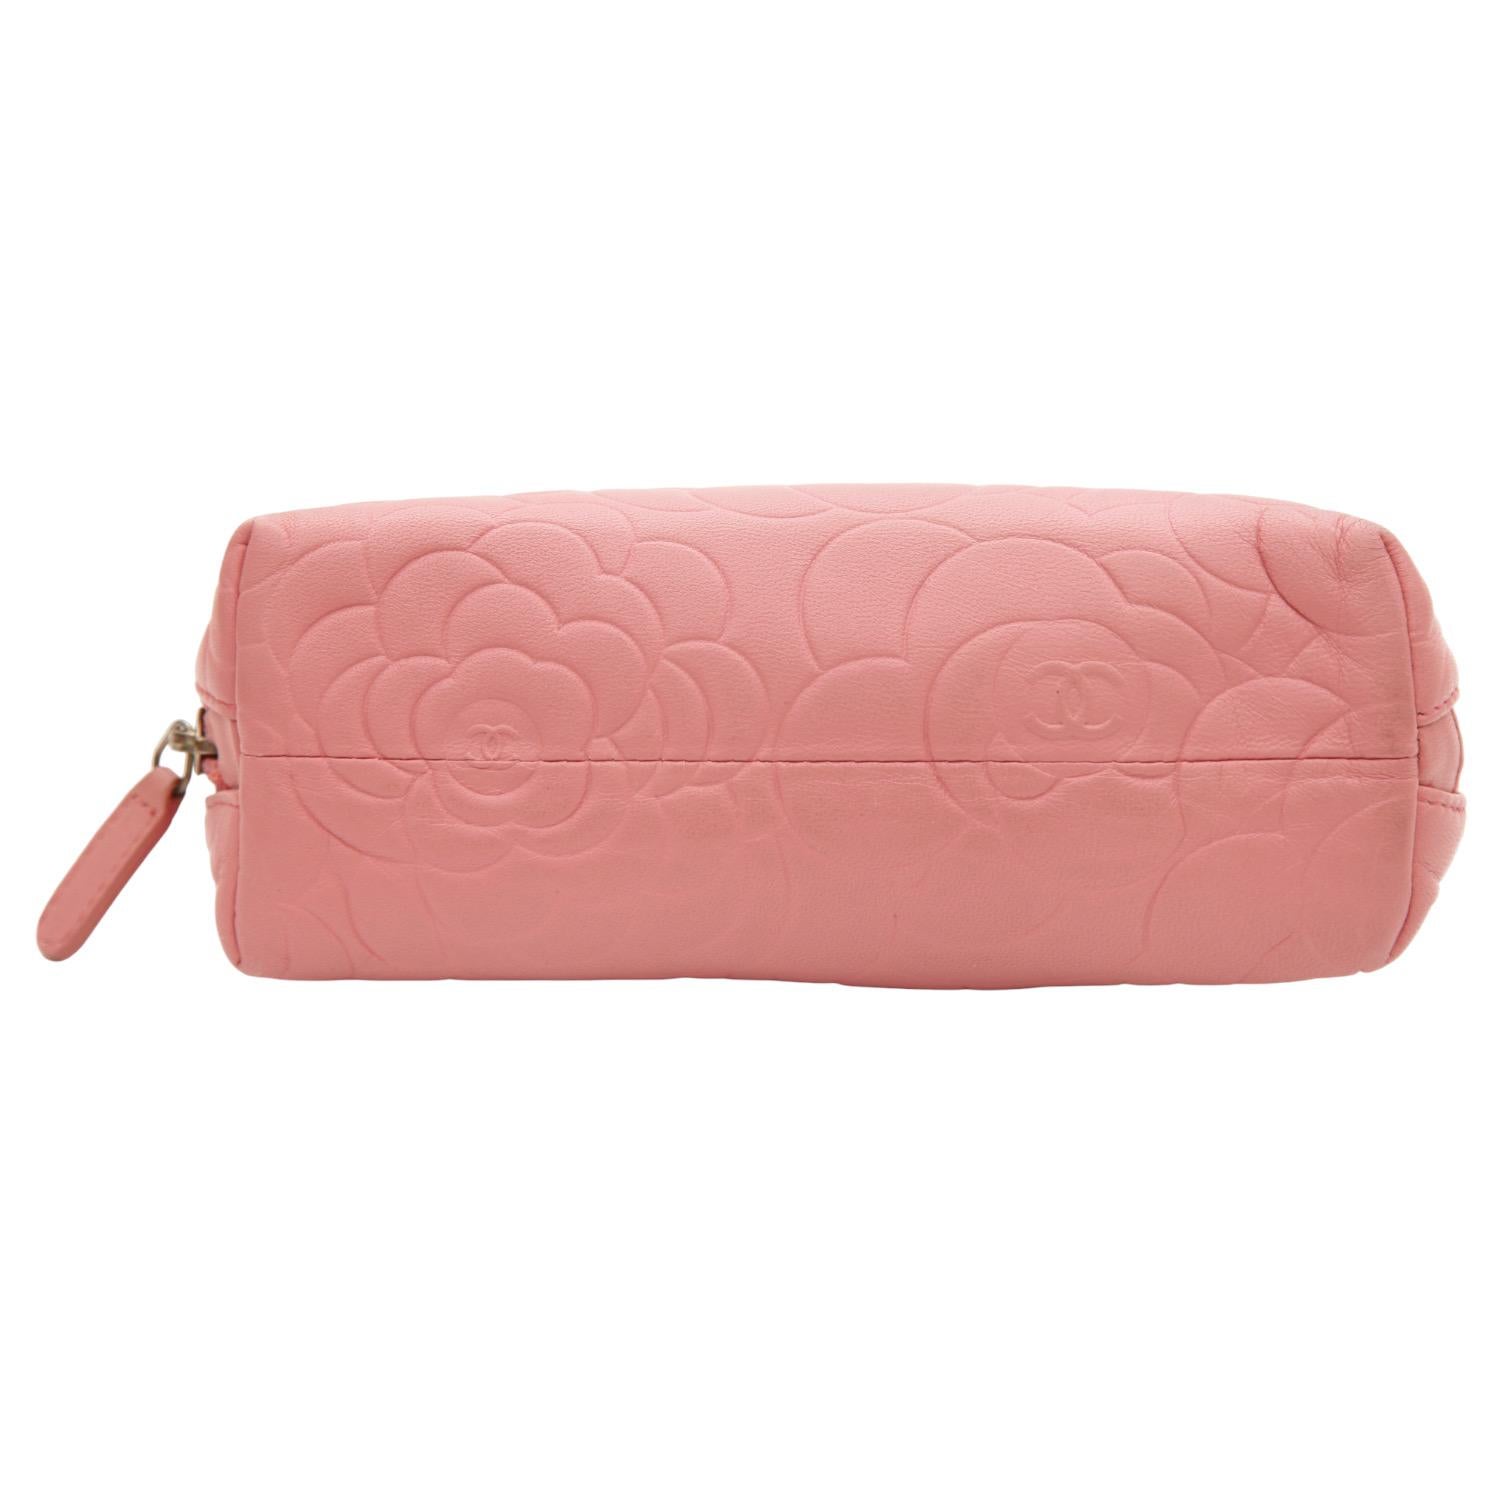 Women's CHANEL Pink Lambskin Leather Camellia Cosmetic Pouch Case Bag Silver CC Zipper